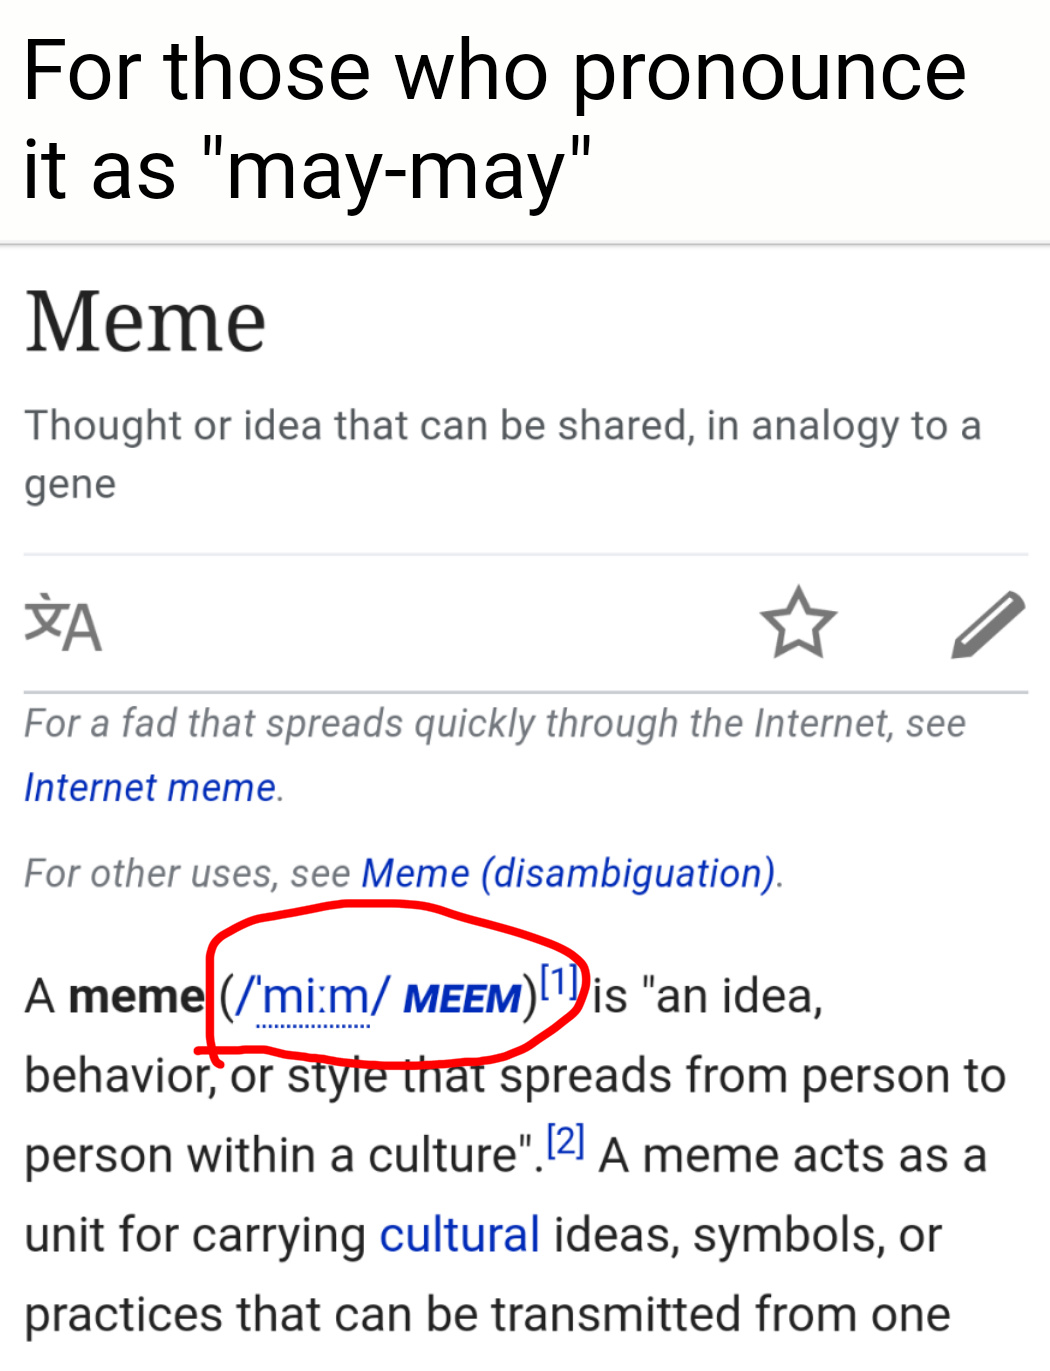 It's obviously pronounced as meme